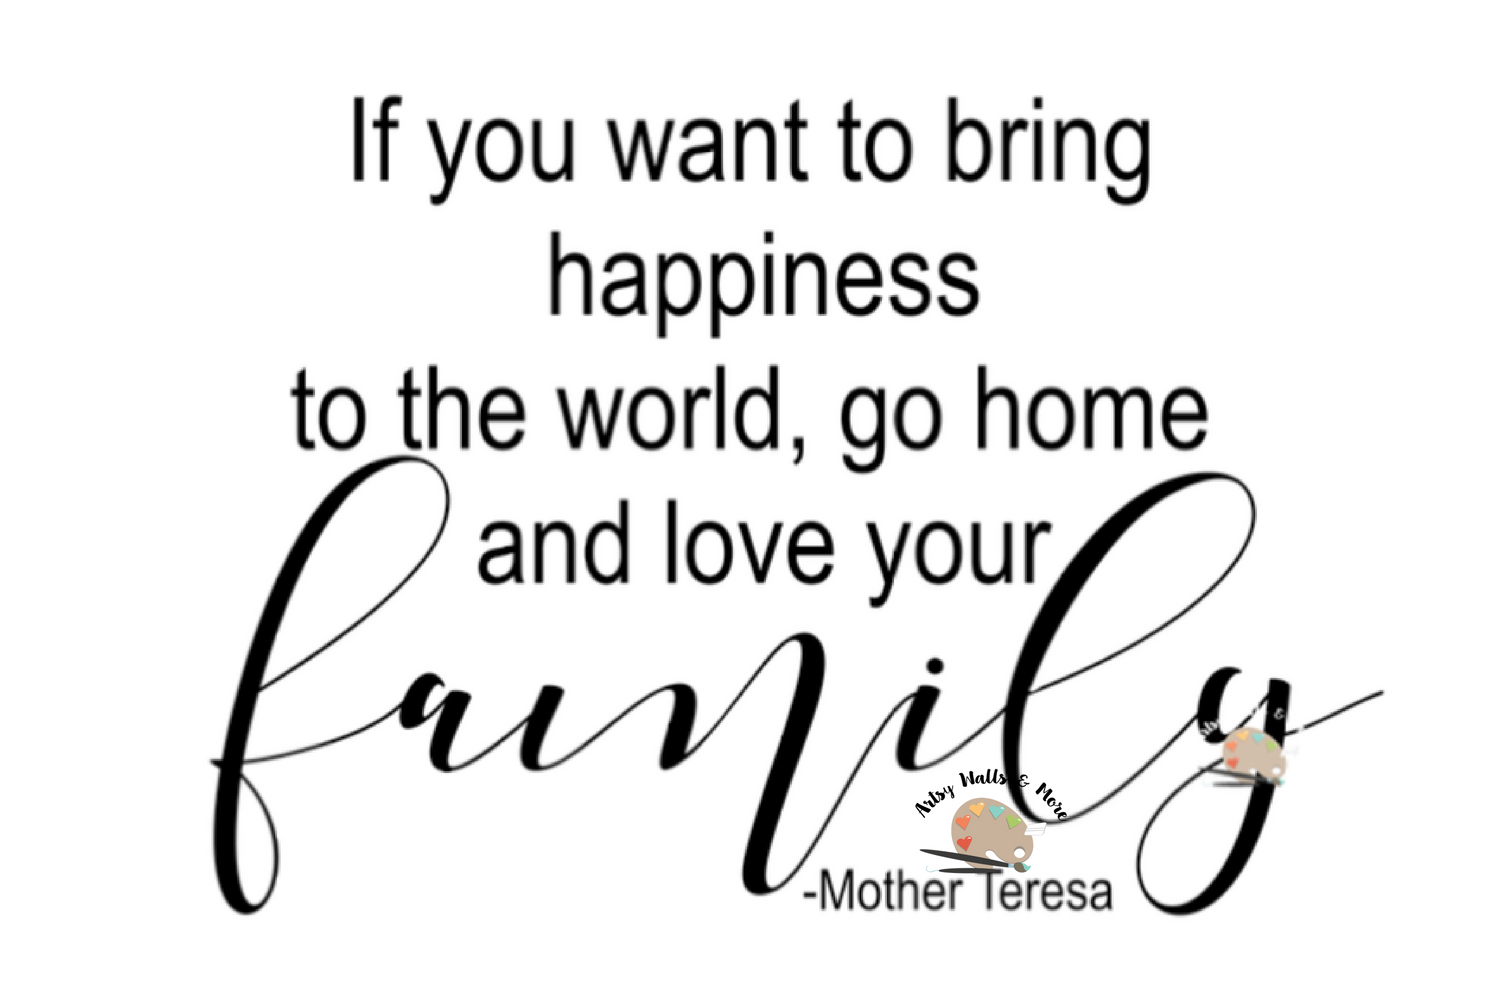 Download Happiness...love your family Mother Teresa quote svg file